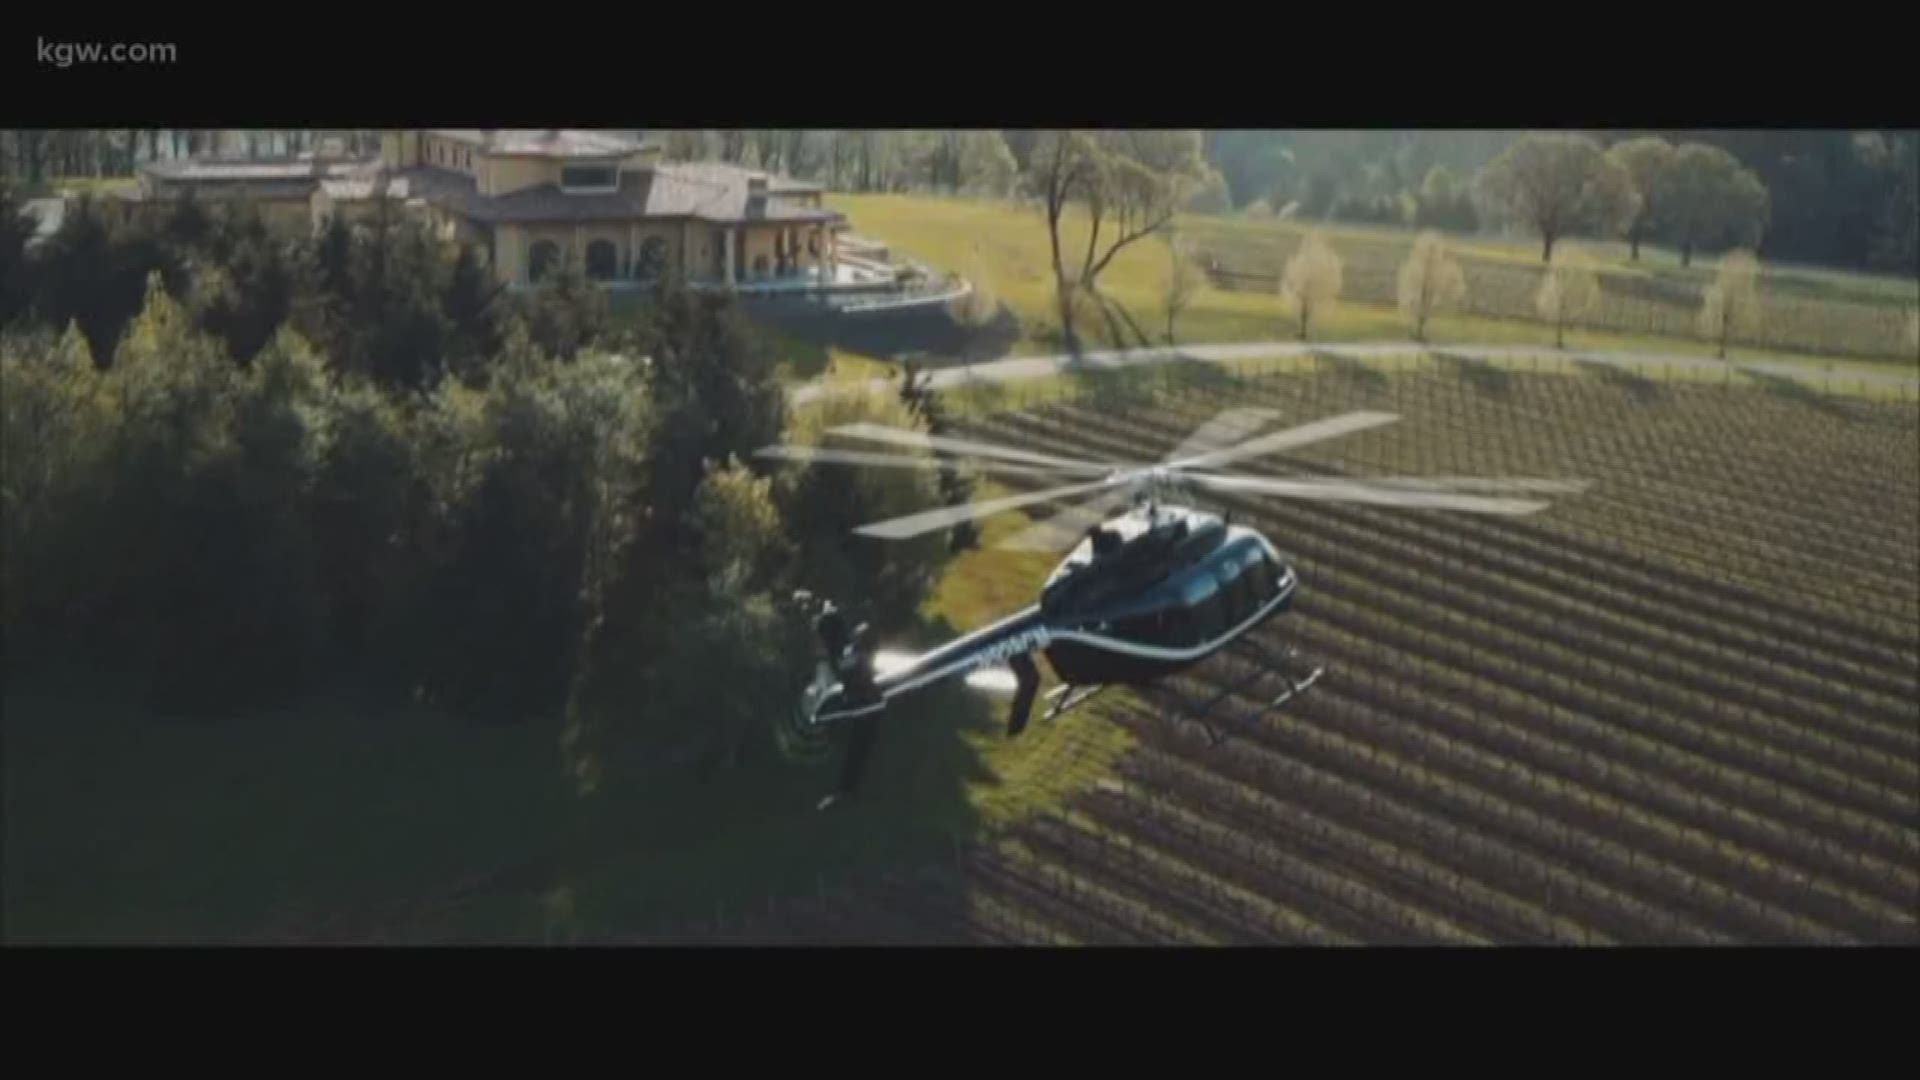 Helicopter rides are offered at Domaine Serene.